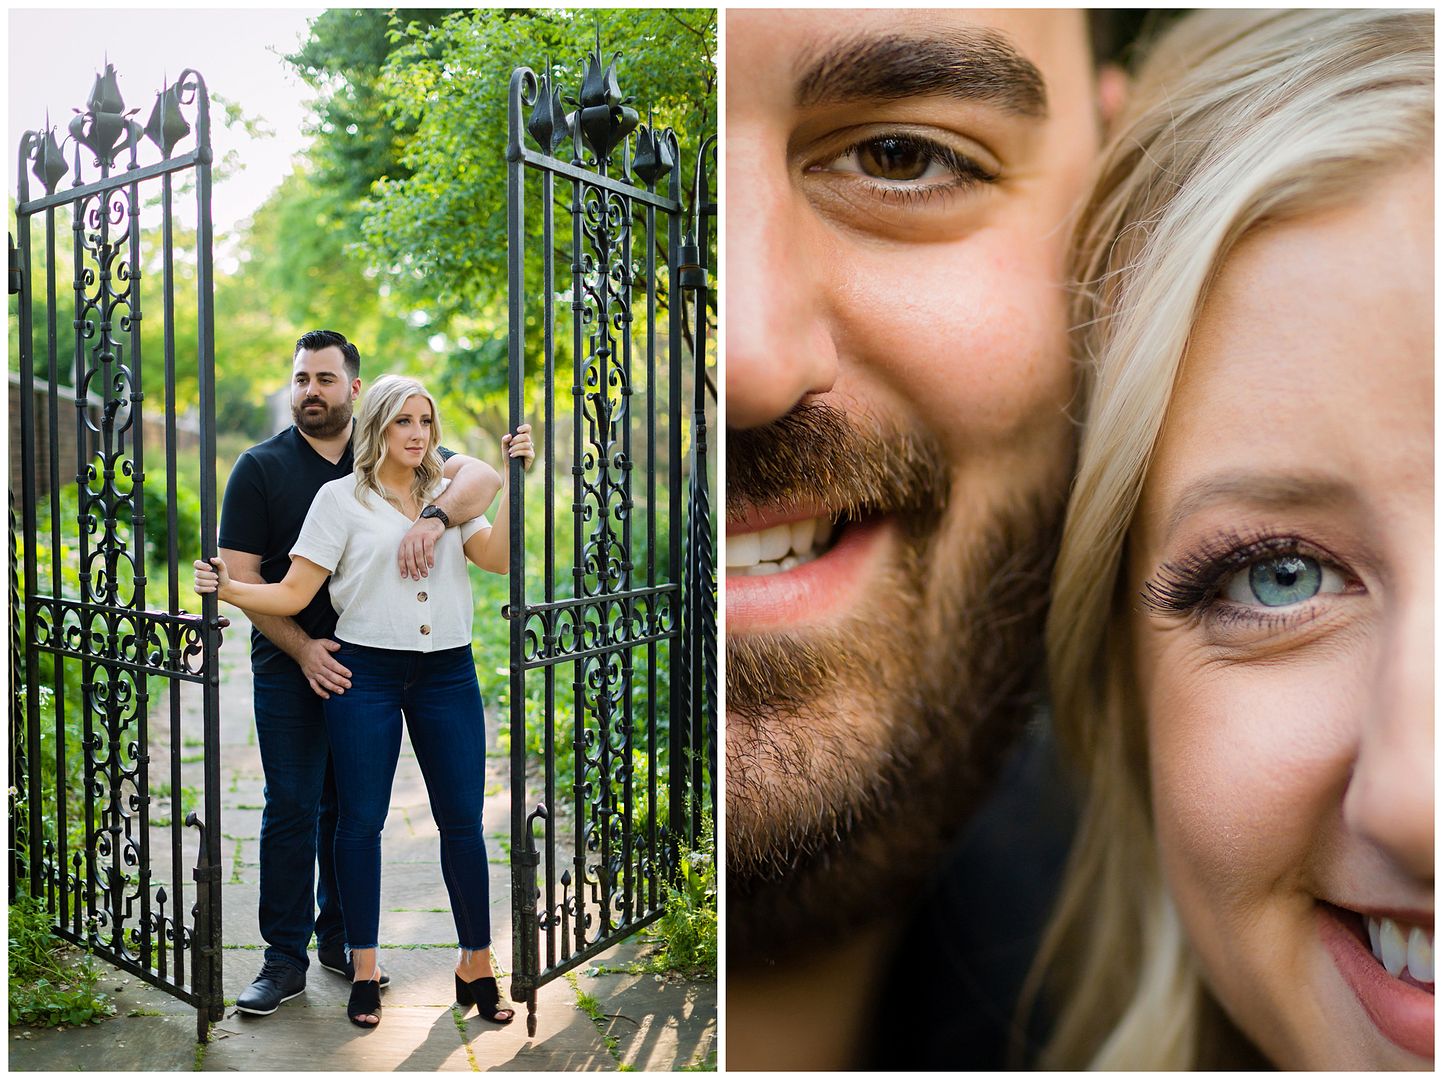 Jocelyn and Daniel - Engagement Session at Mellon Park Walled Garden and Strip District